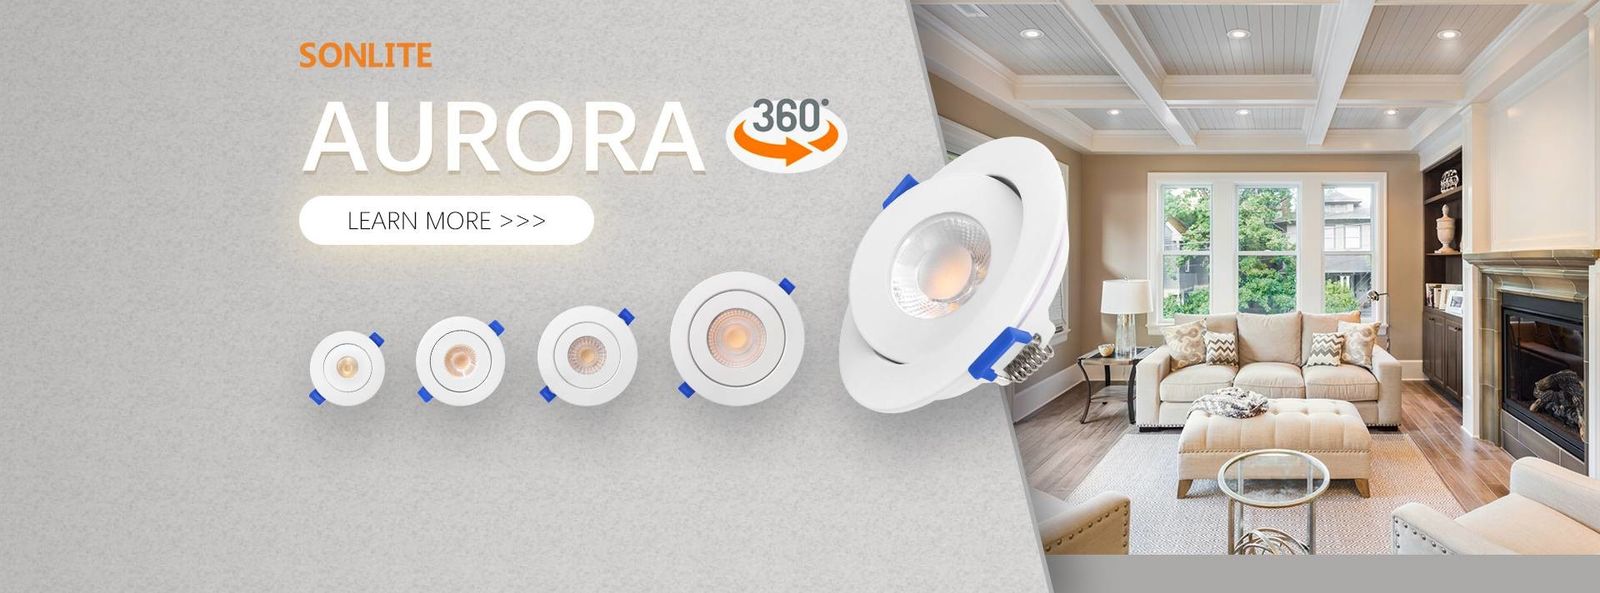 qualità Dimmable LED Downlights Fabbrica